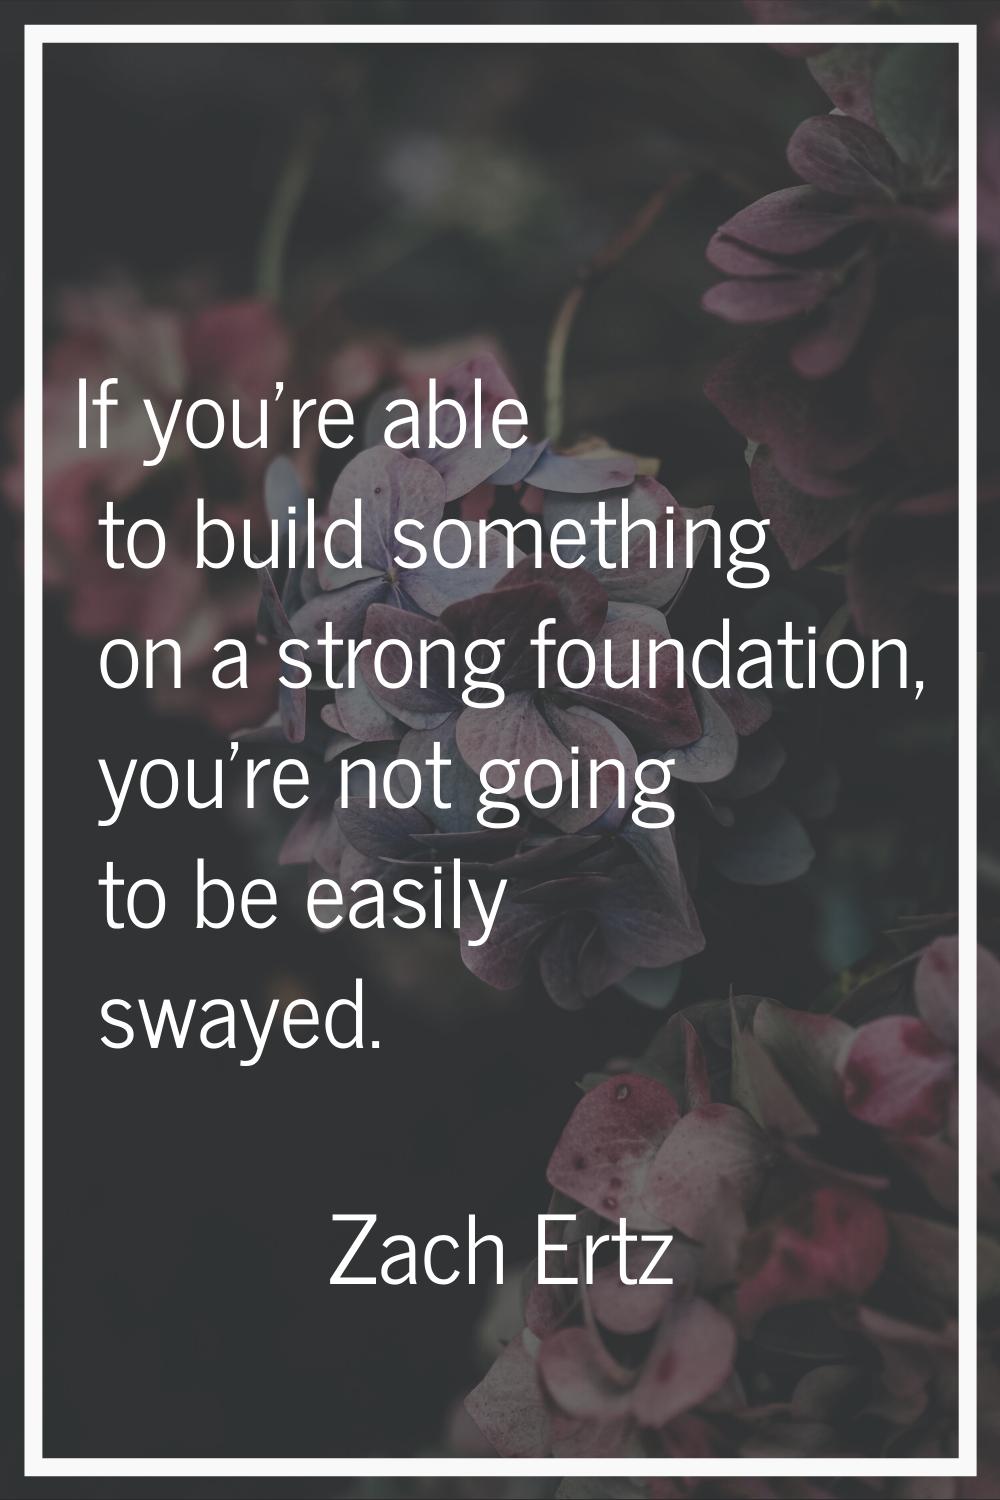 If you're able to build something on a strong foundation, you're not going to be easily swayed.